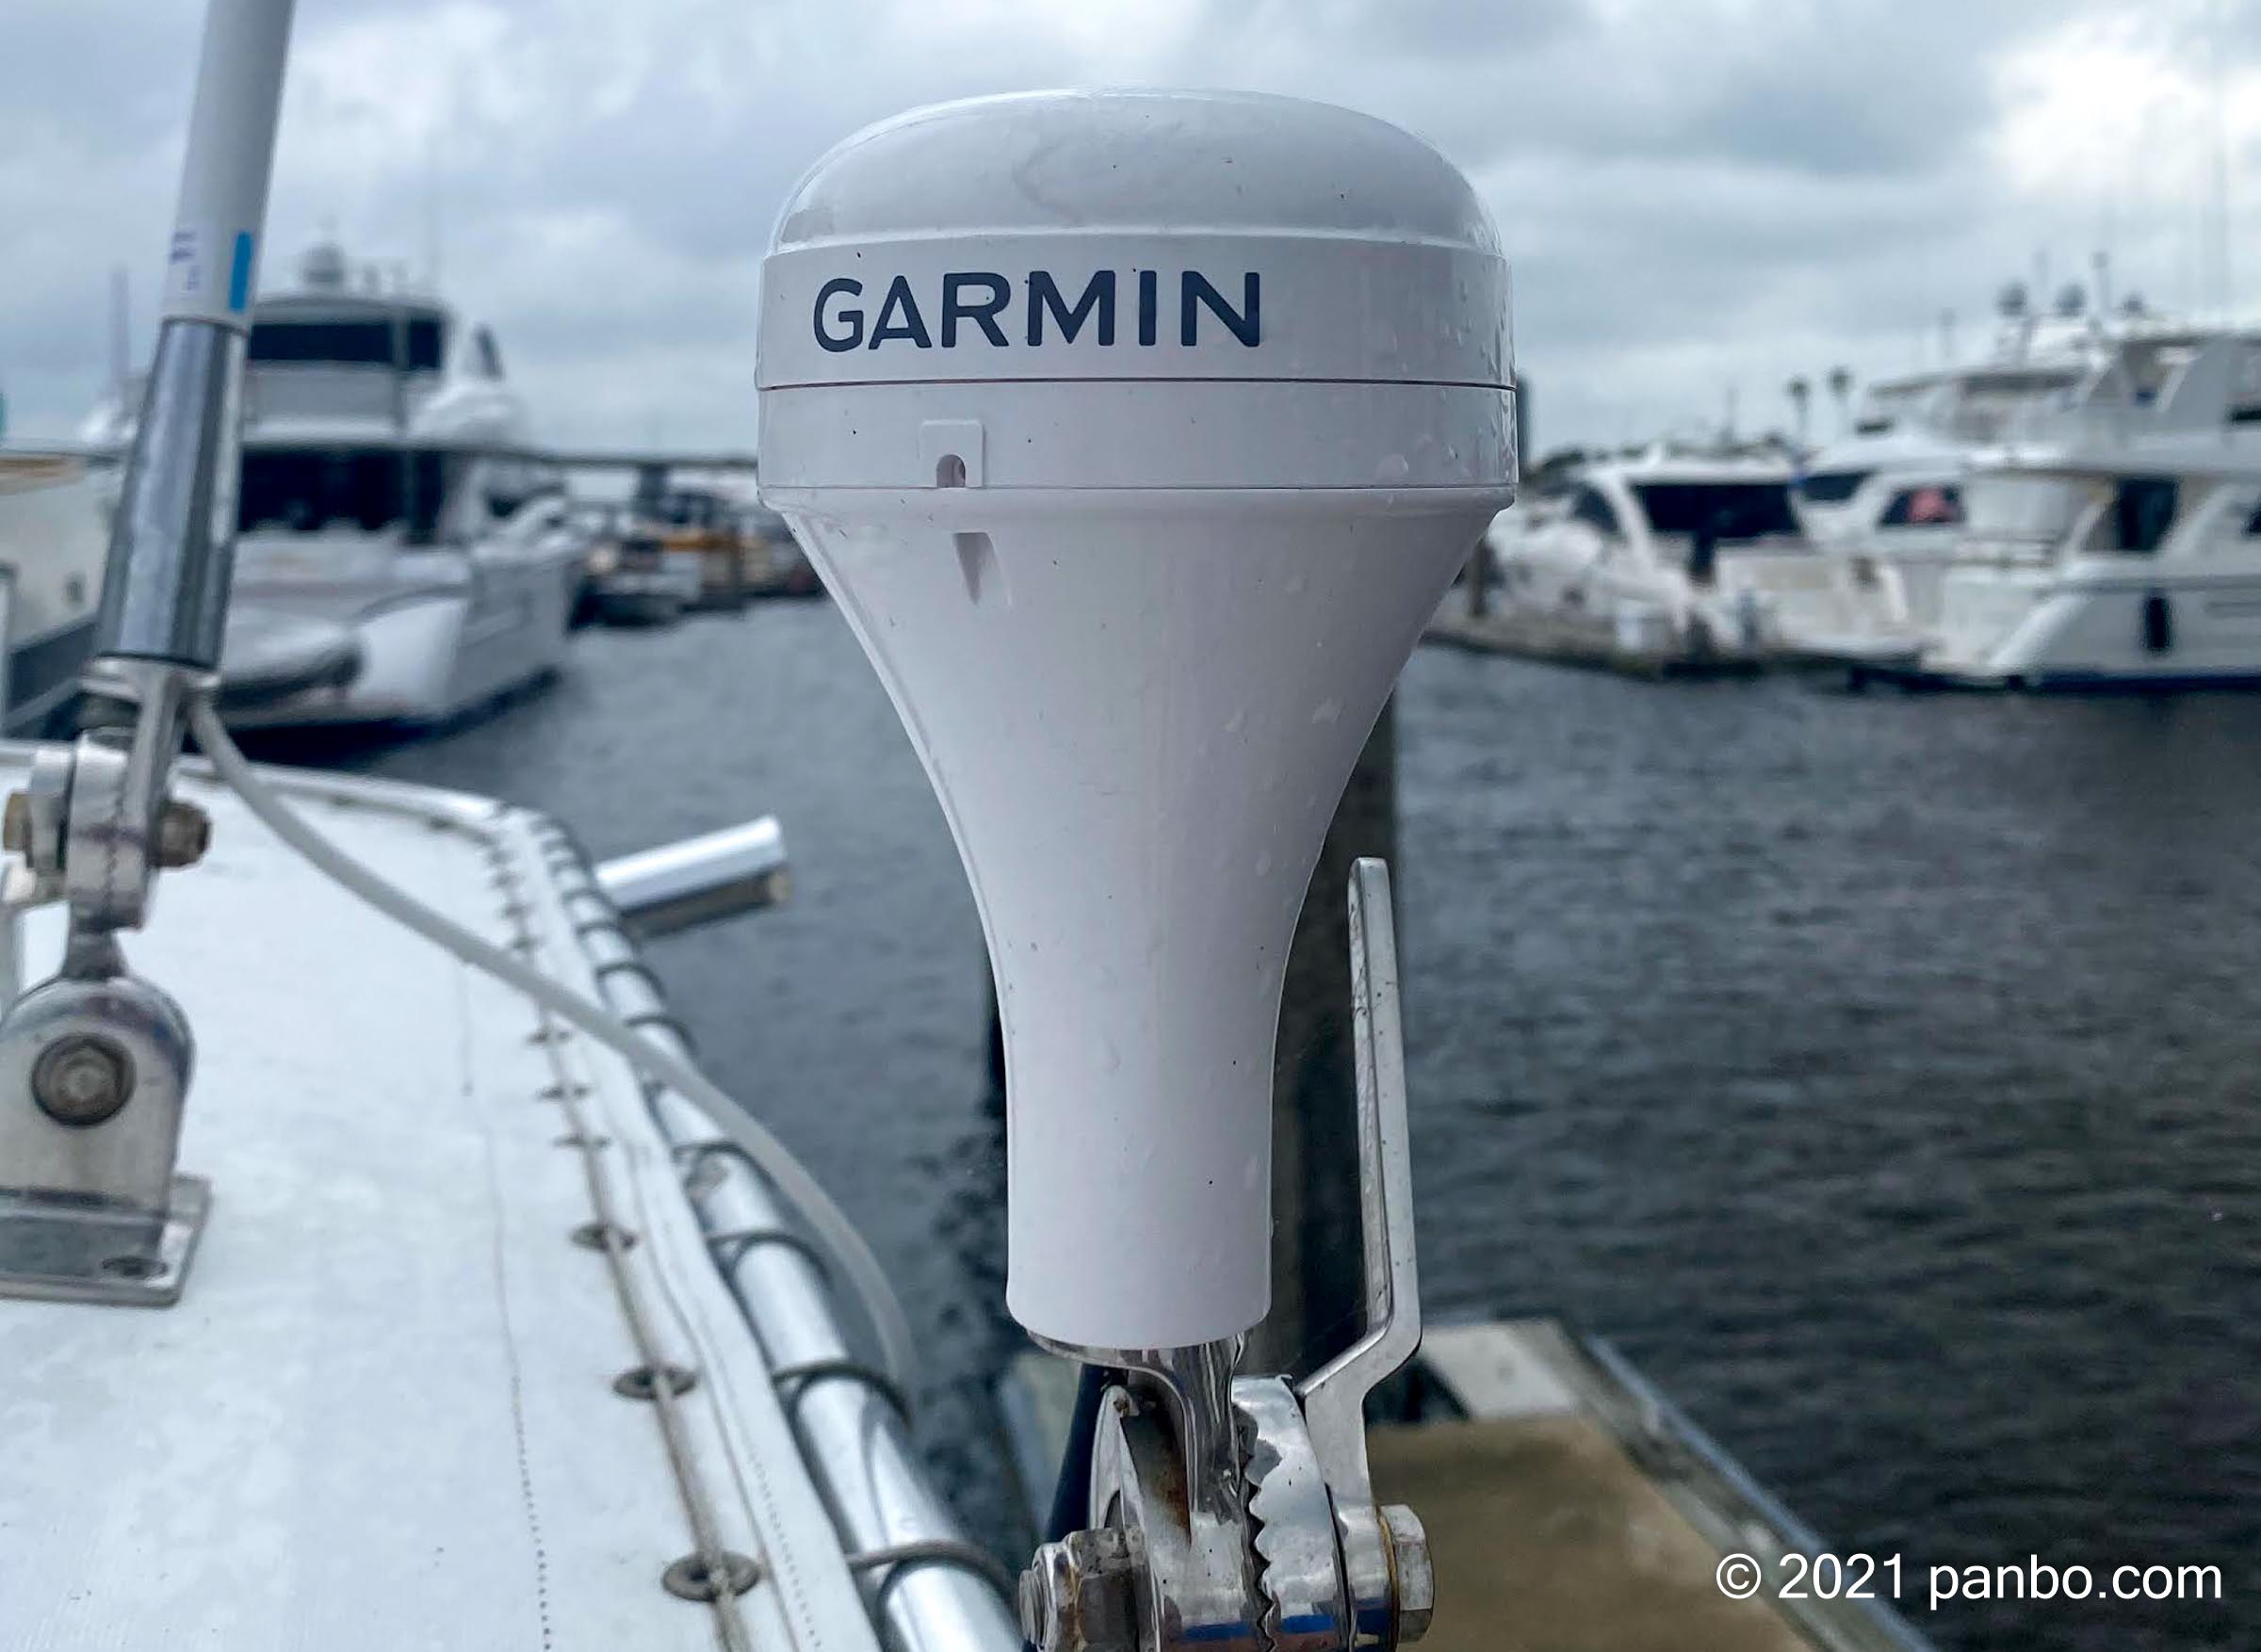 Garmin 24xd: inexpensive Heading data to stabilize charts, radar, and AIS Panbo